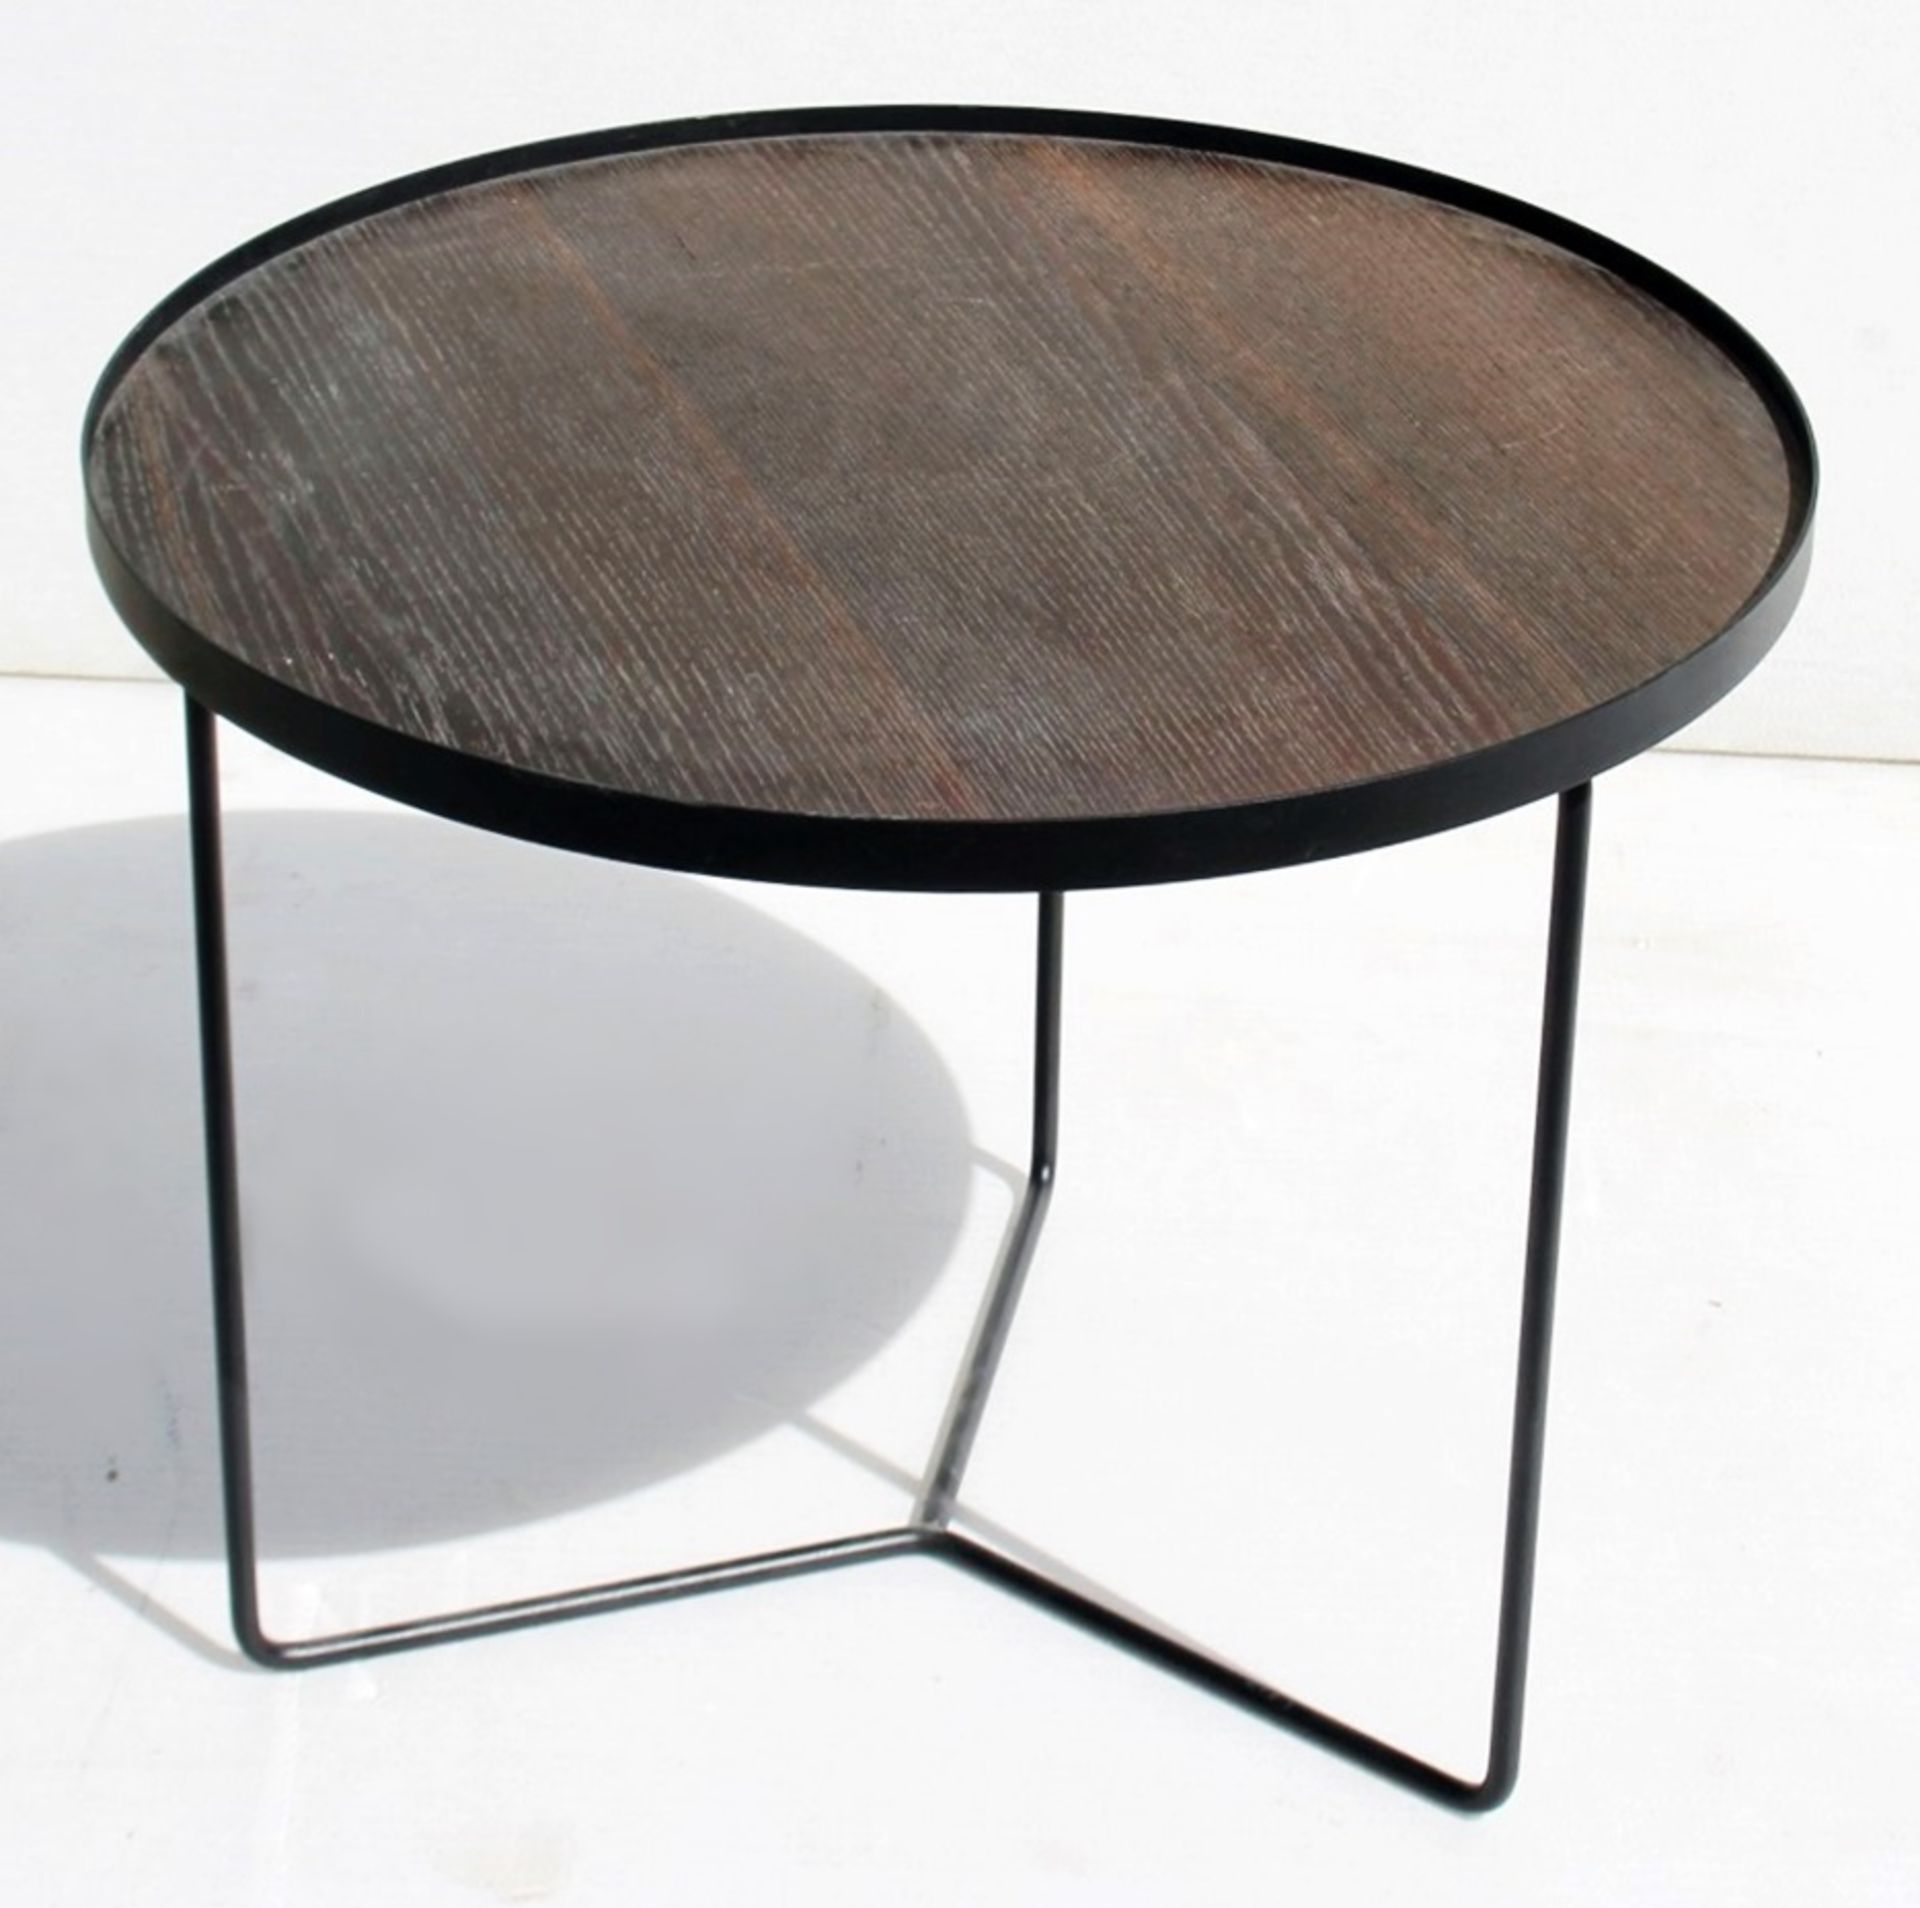 1 x CATTELAN ITALIA 'Billy' Designer Ø60 Wooden Topped Coffee Table - Made in Italy - RRP £669.00